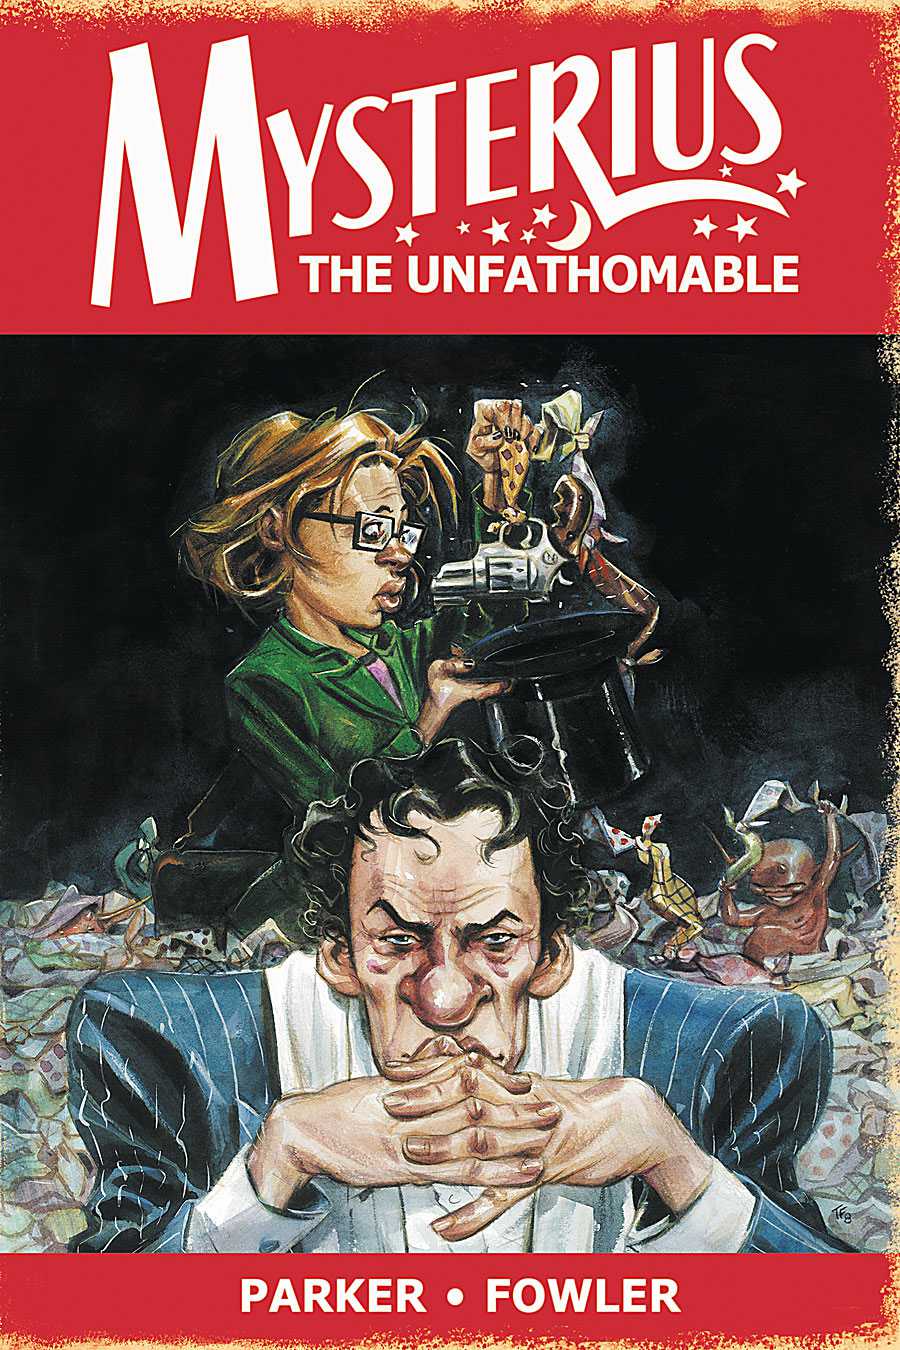 You are currently viewing Notes On A Comic Book: Mysterius The Unfathomable